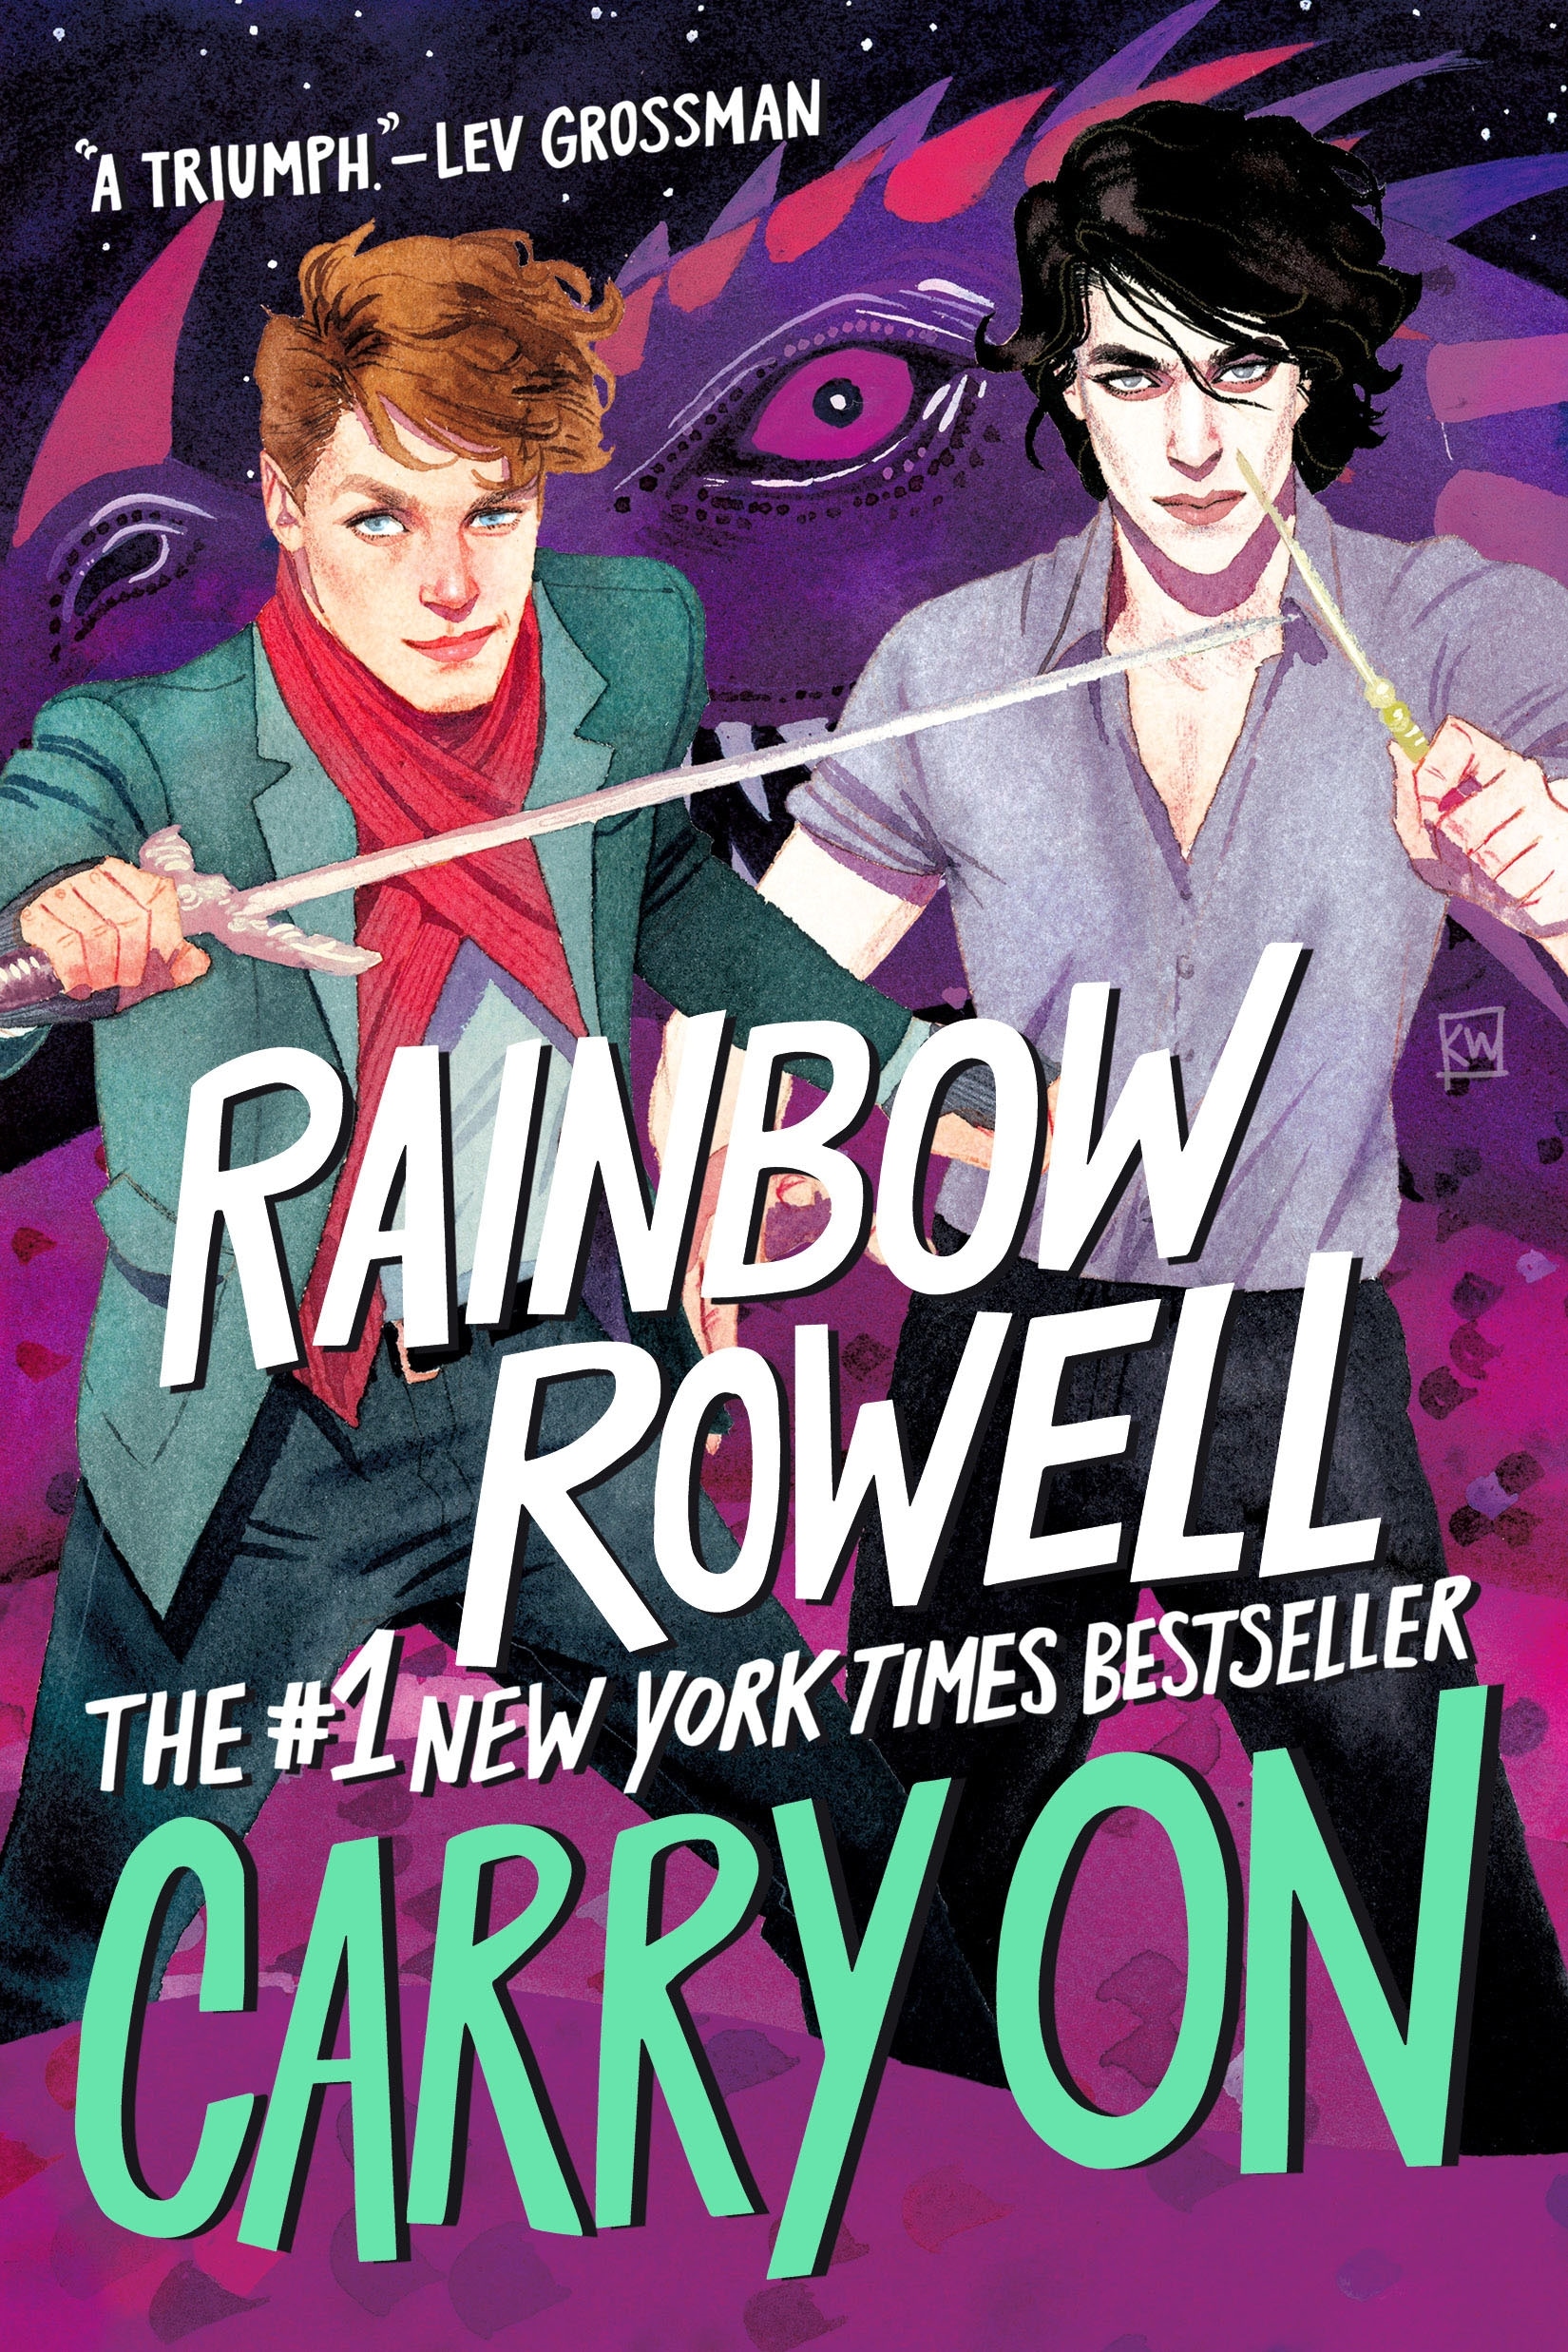 Book “Carry On” by Rainbow Rowell — May 9, 2017